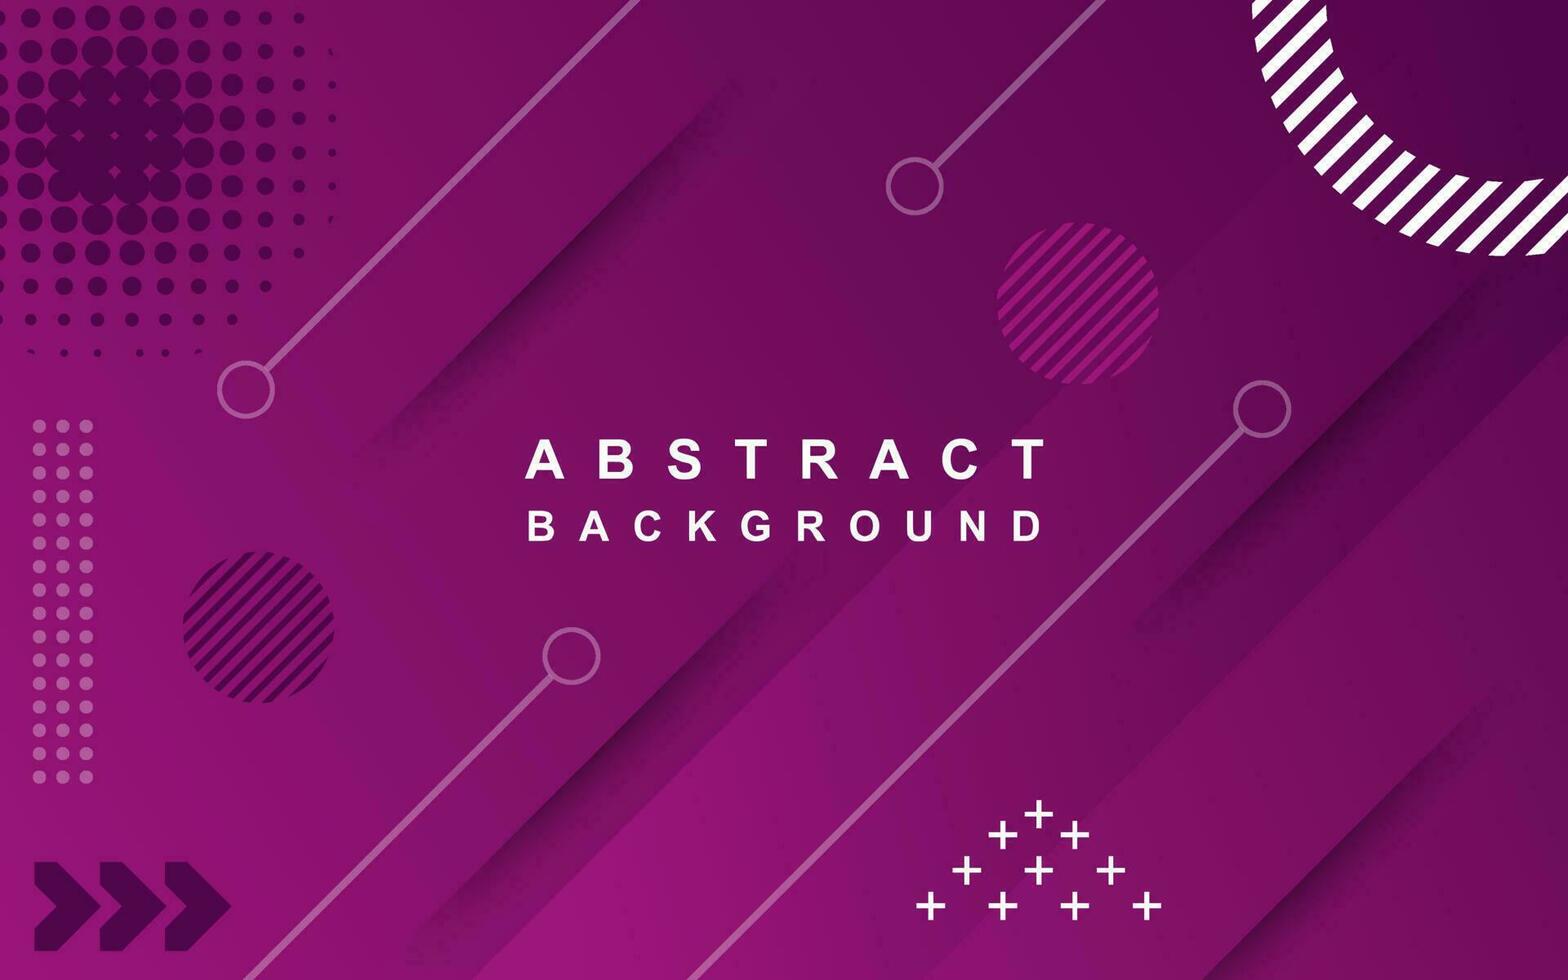 background, purple abstract geometric shapes vector